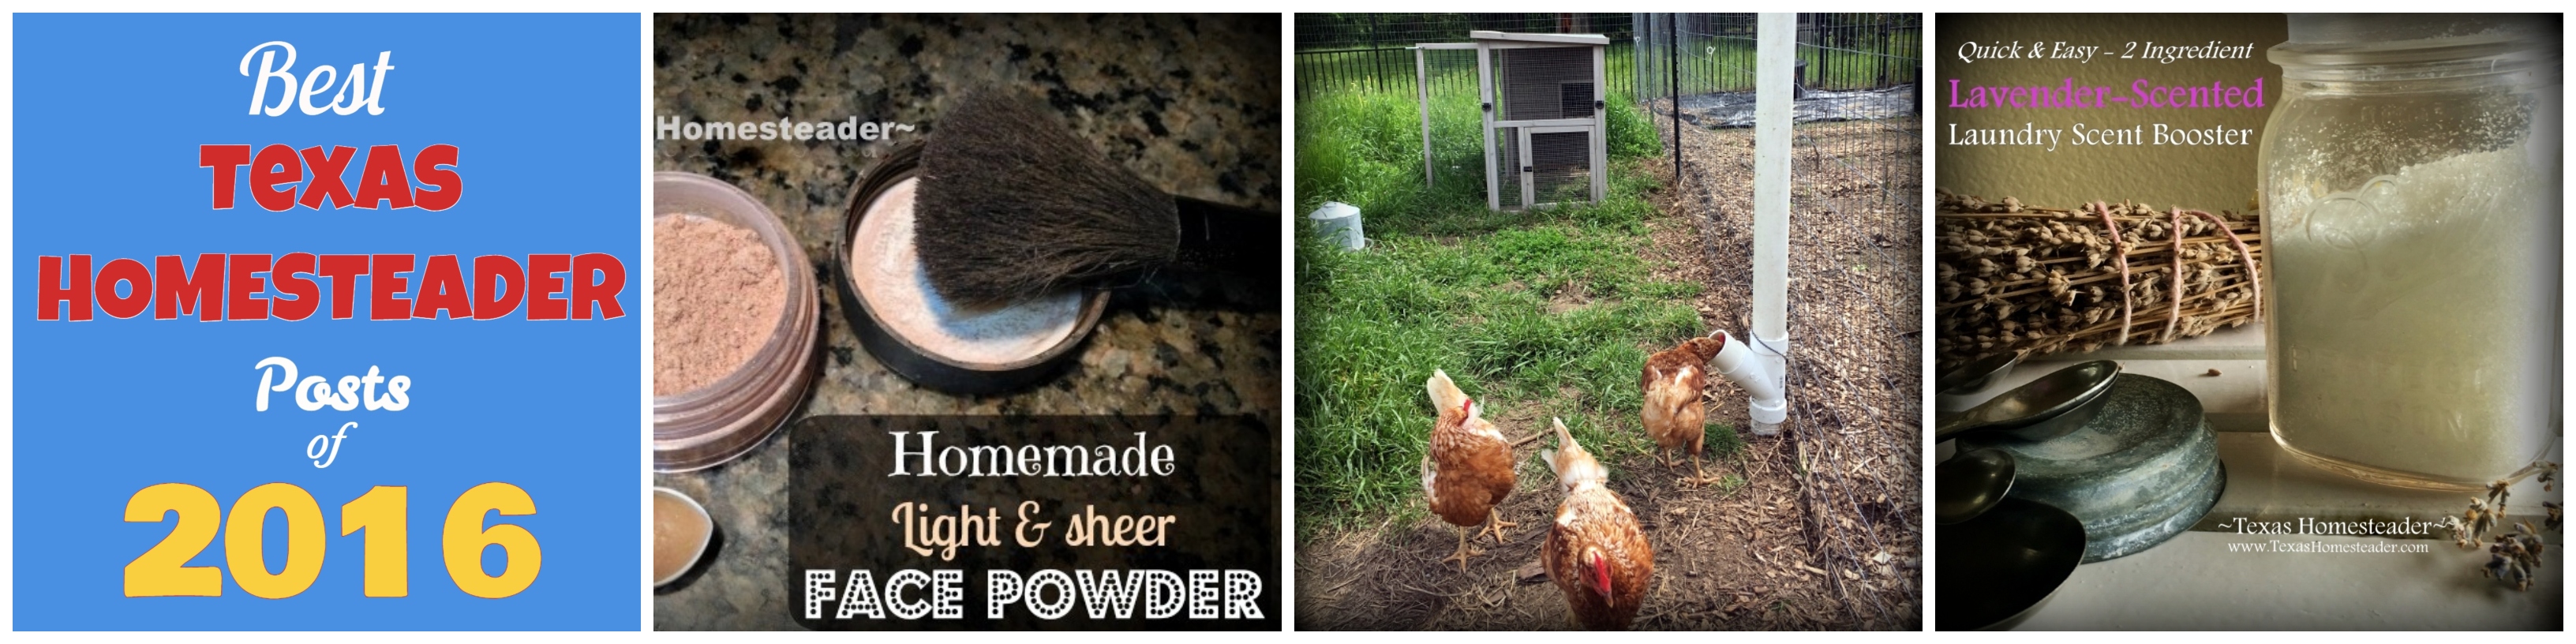 Here are the Top 10 Homesteading Posts on our page since 2013.This is the yearly roundup version - all the year's top 10 in one place! #TexasHomesteader